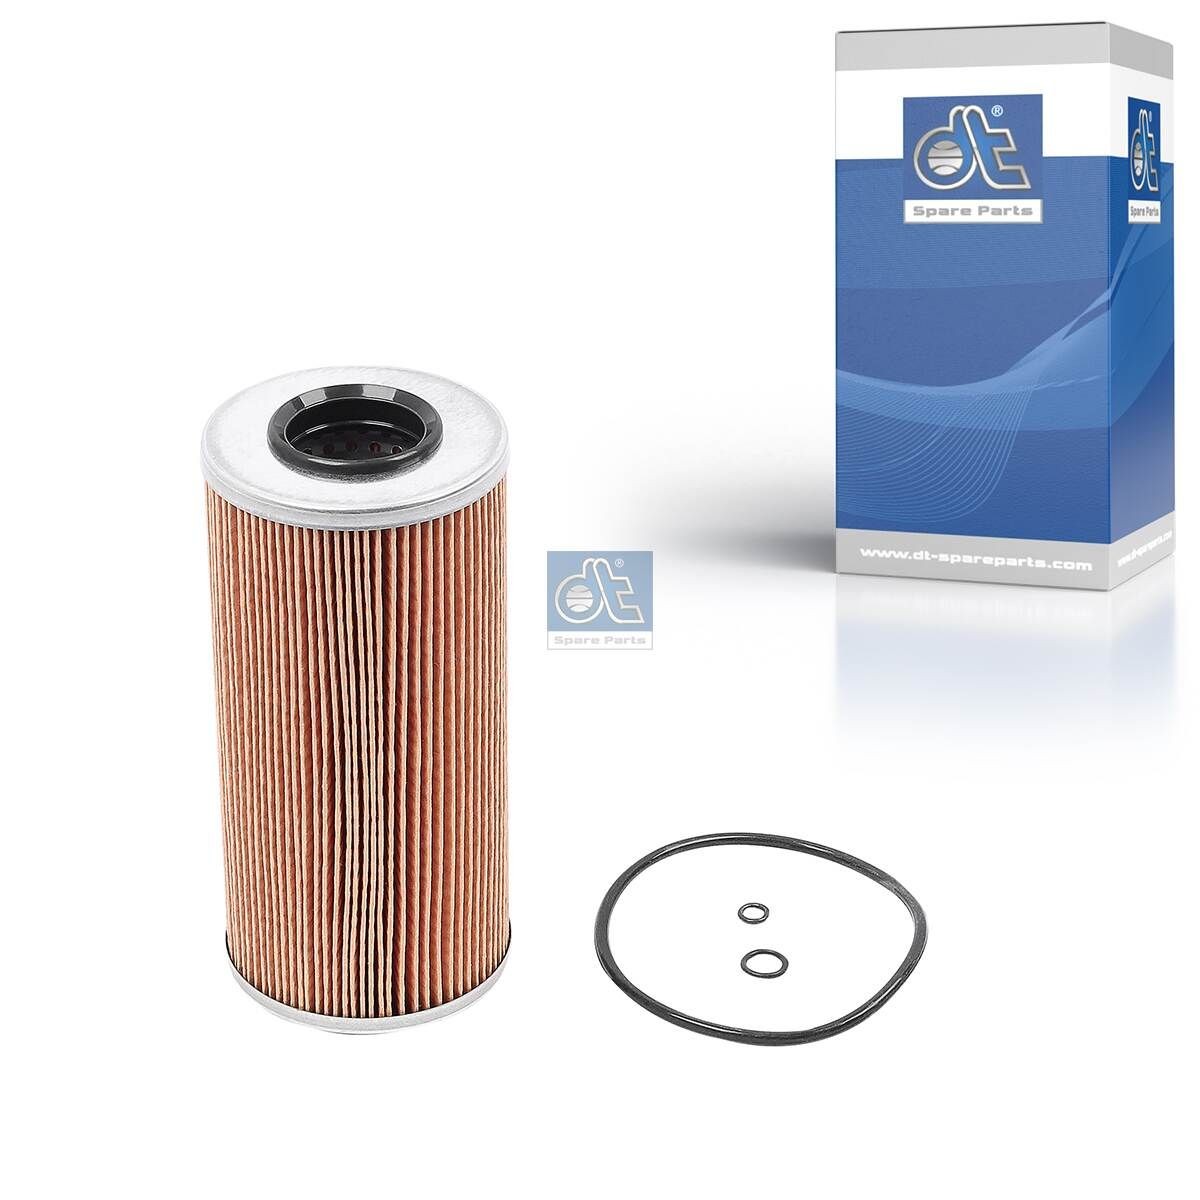 HU 951 x DT Spare Parts 3.14108 Oil filter A 602 180 00 09